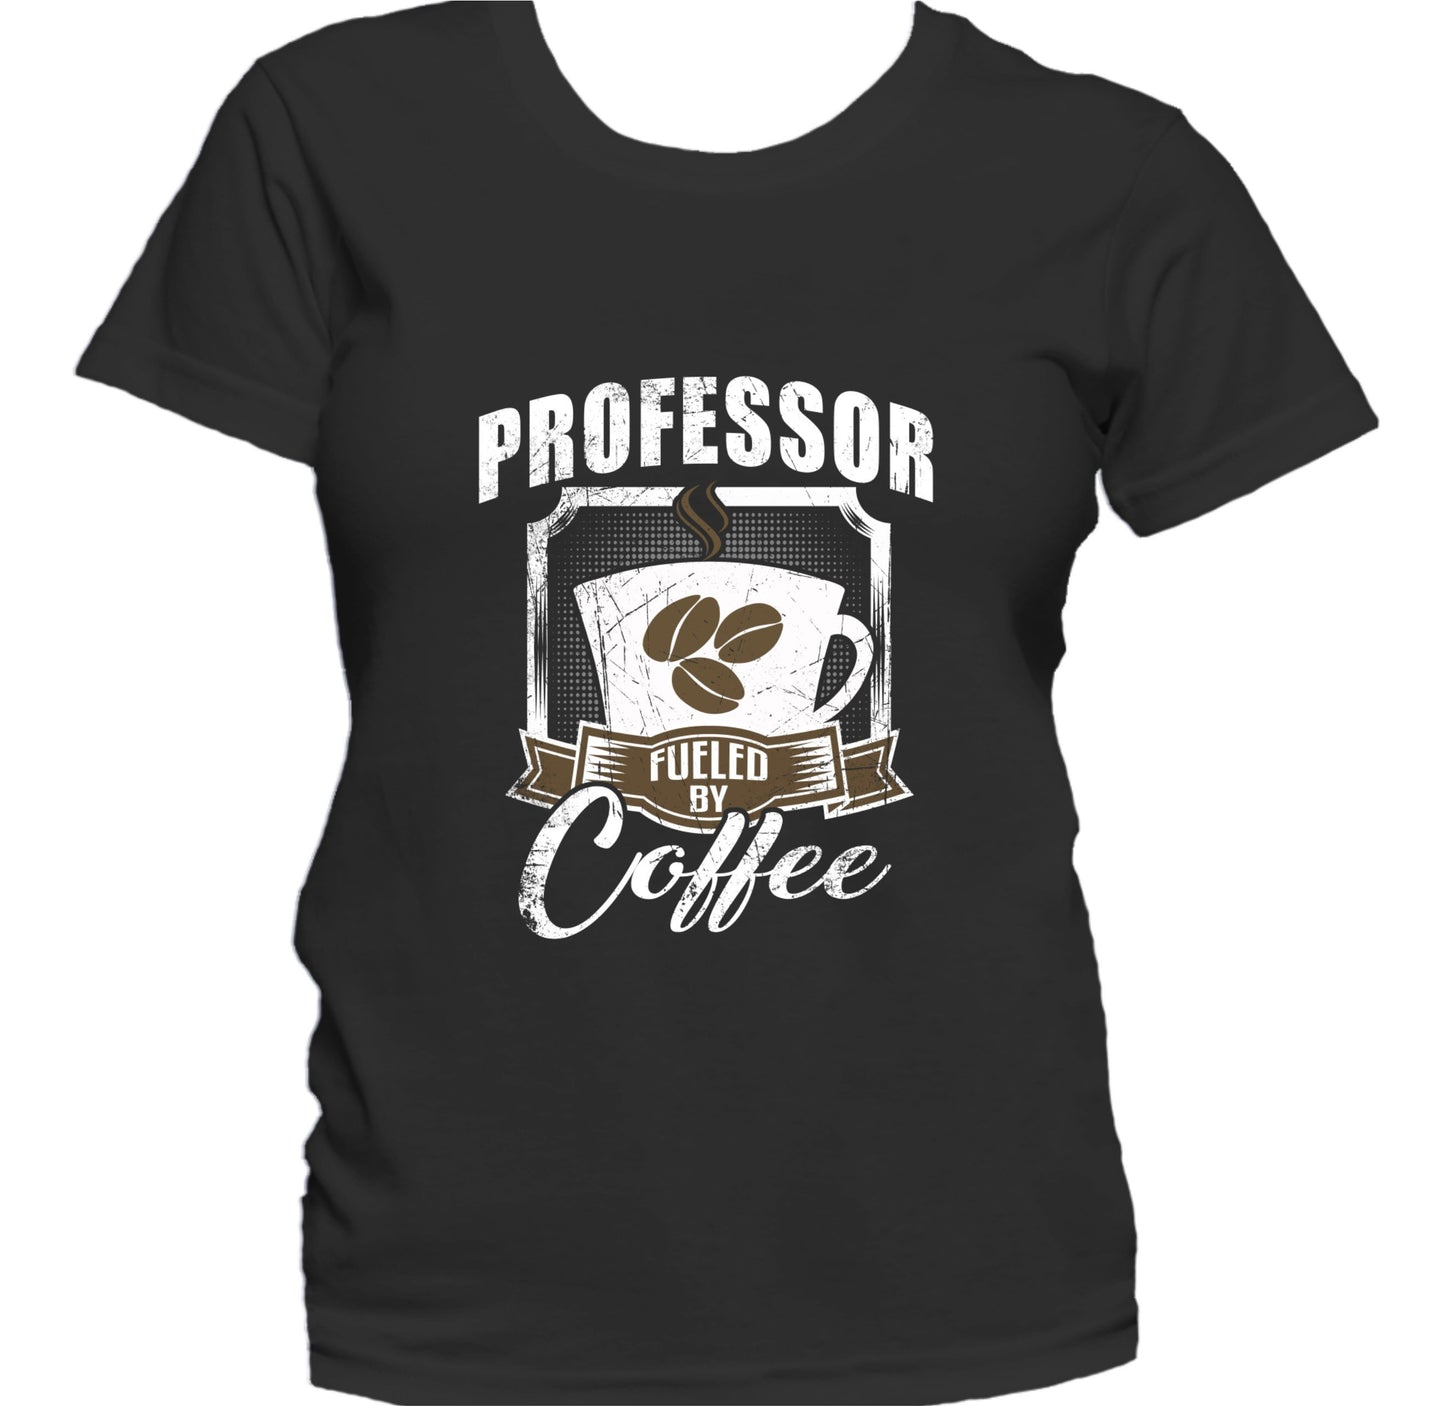 Professor Fueled By Coffee Funny Women's T-Shirt